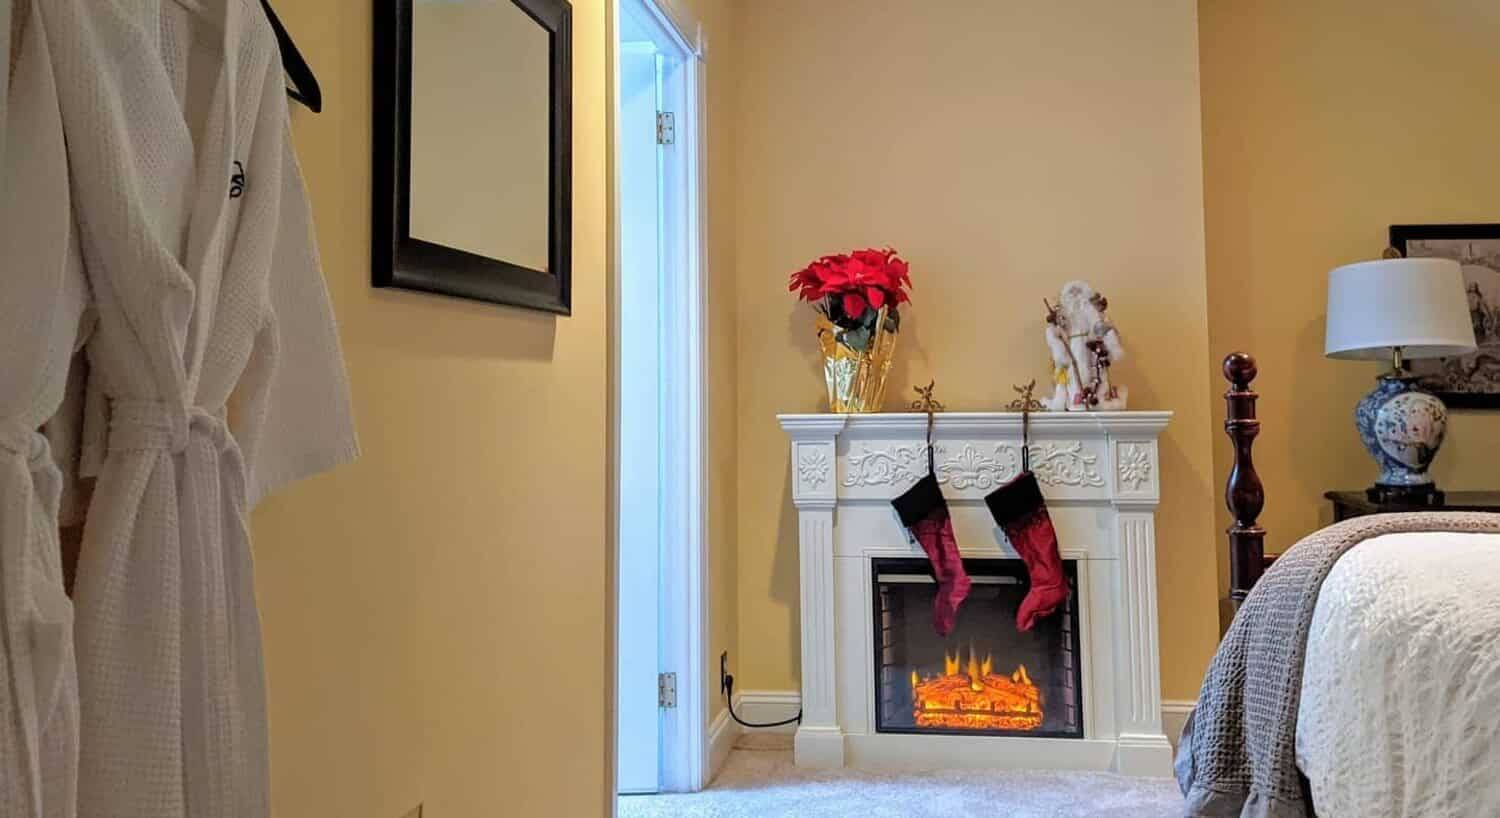 Small white electric fireplace with two hanging stockings in a guest room with yellow walls